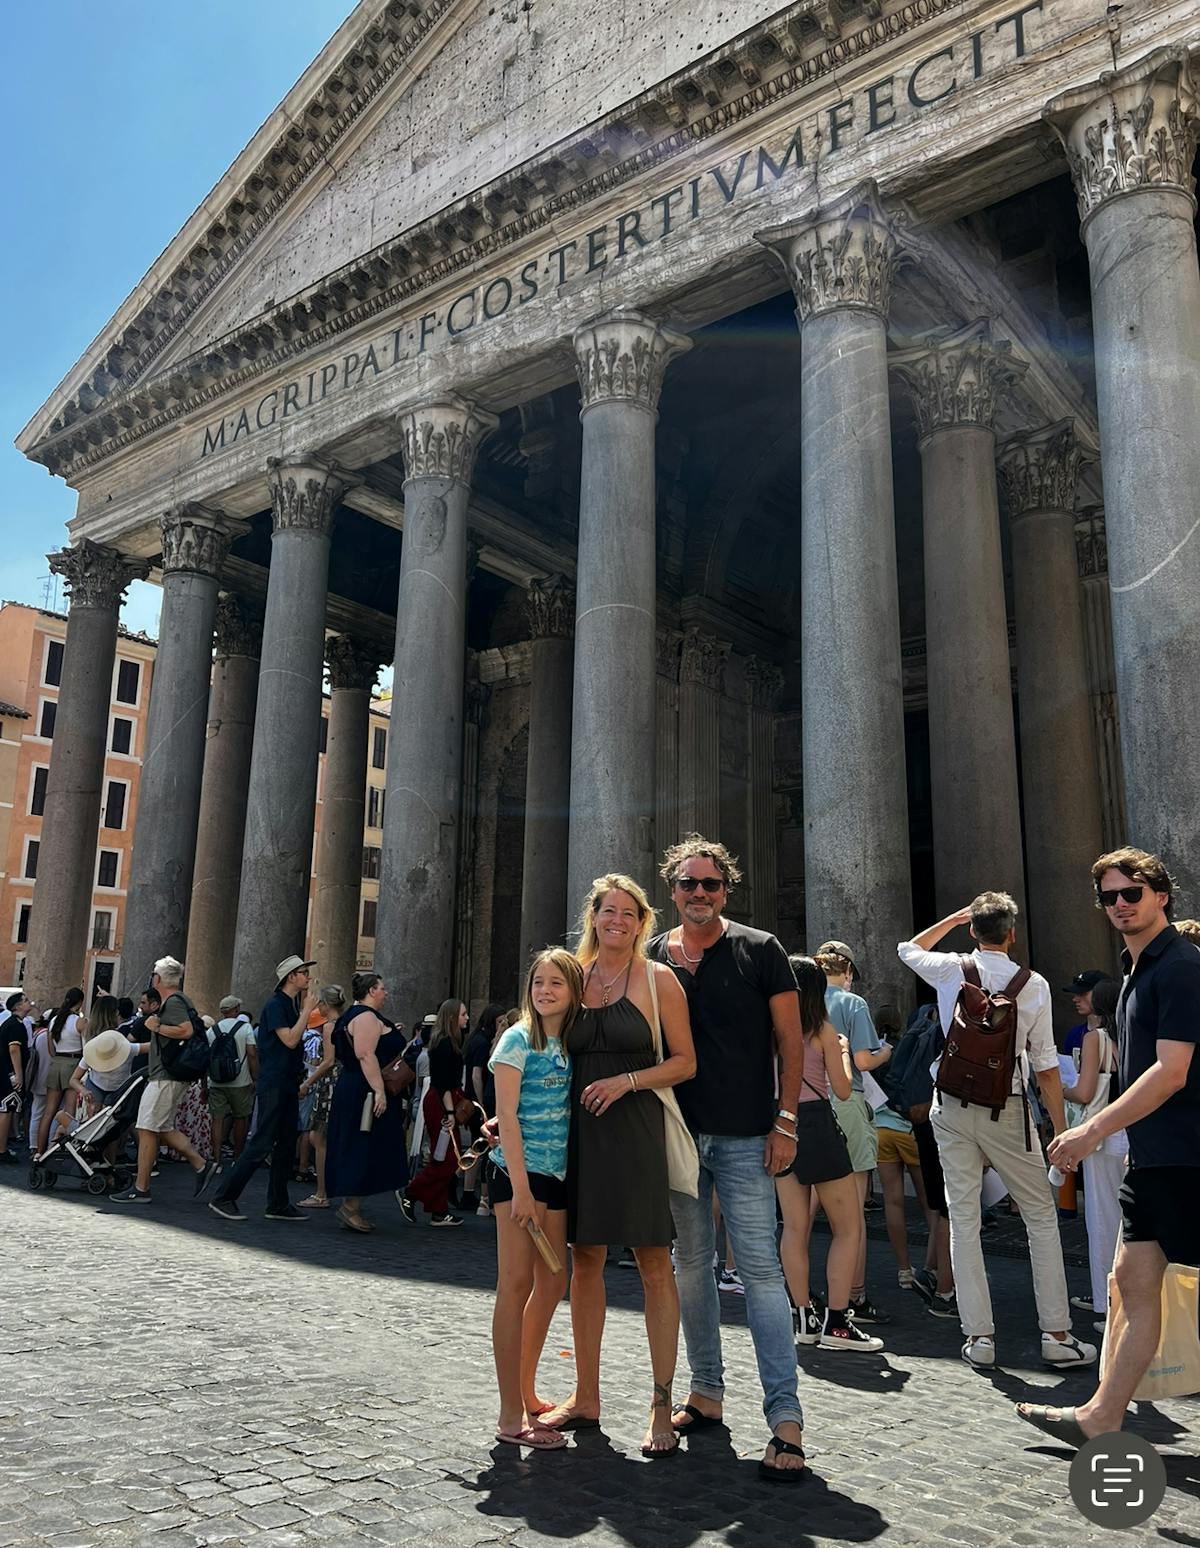 a group of people standing in front of Pantheon, Rome